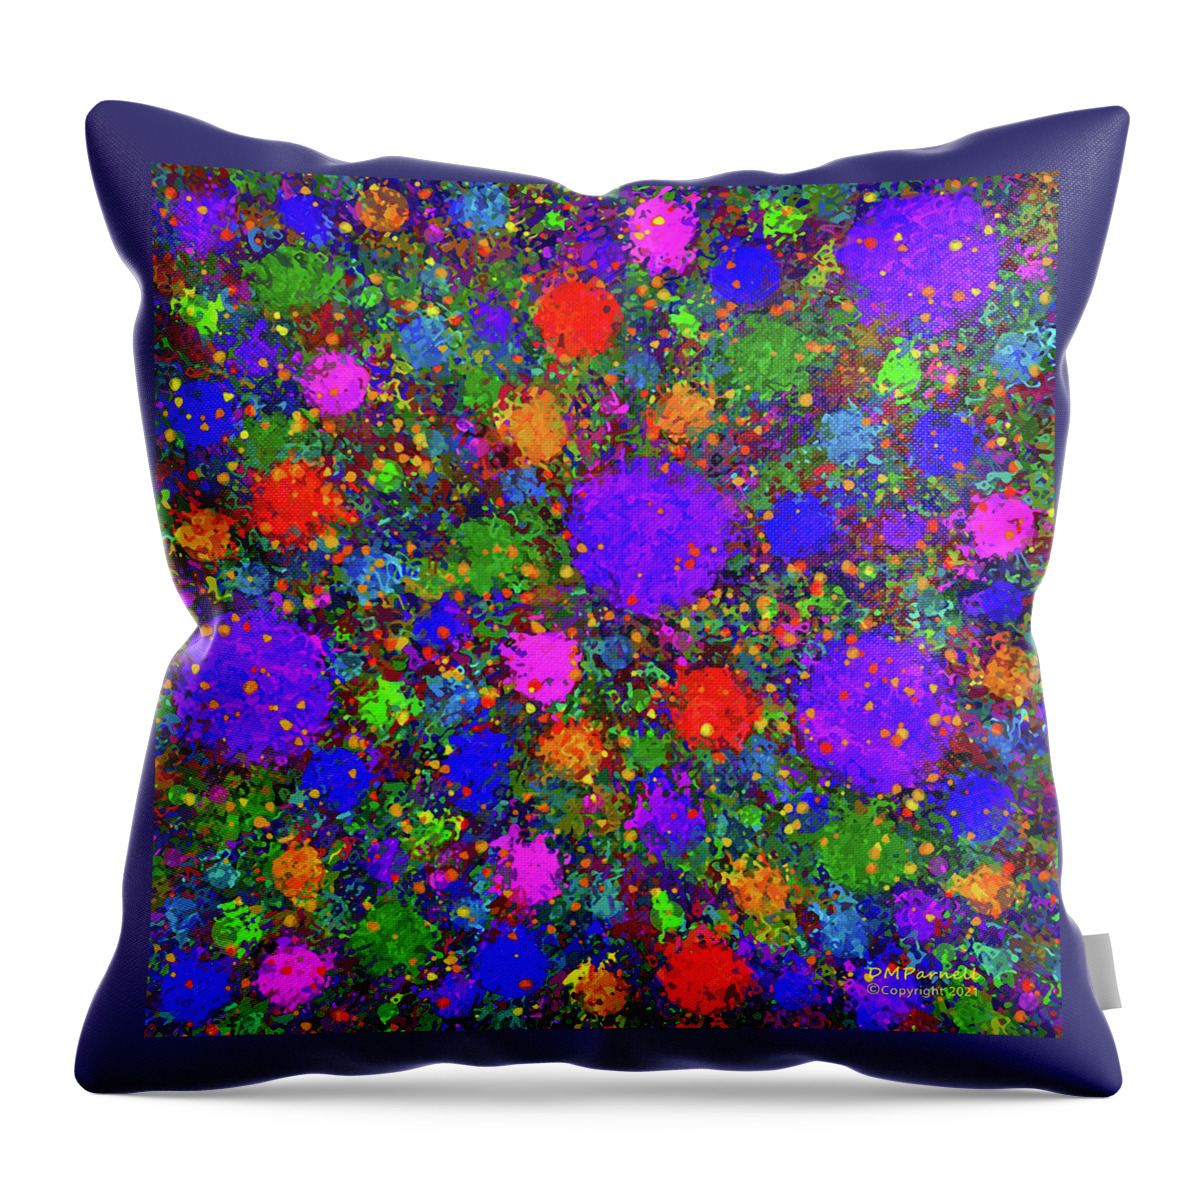 Abstract Throw Pillow featuring the digital art A View Of The Planets by Diane Parnell